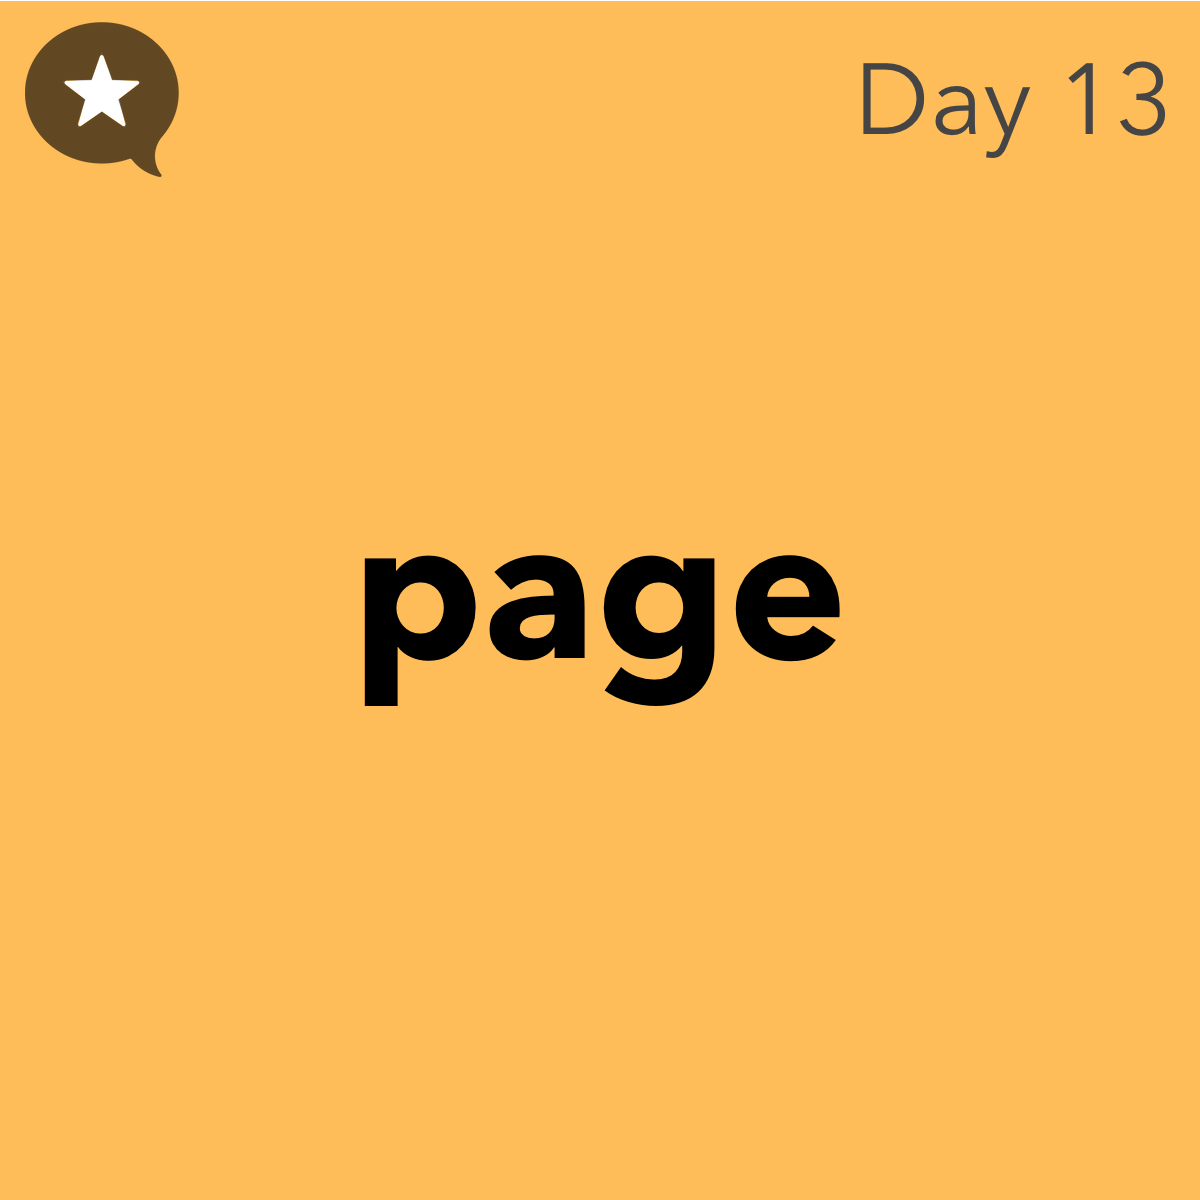 Day 13 page graphic